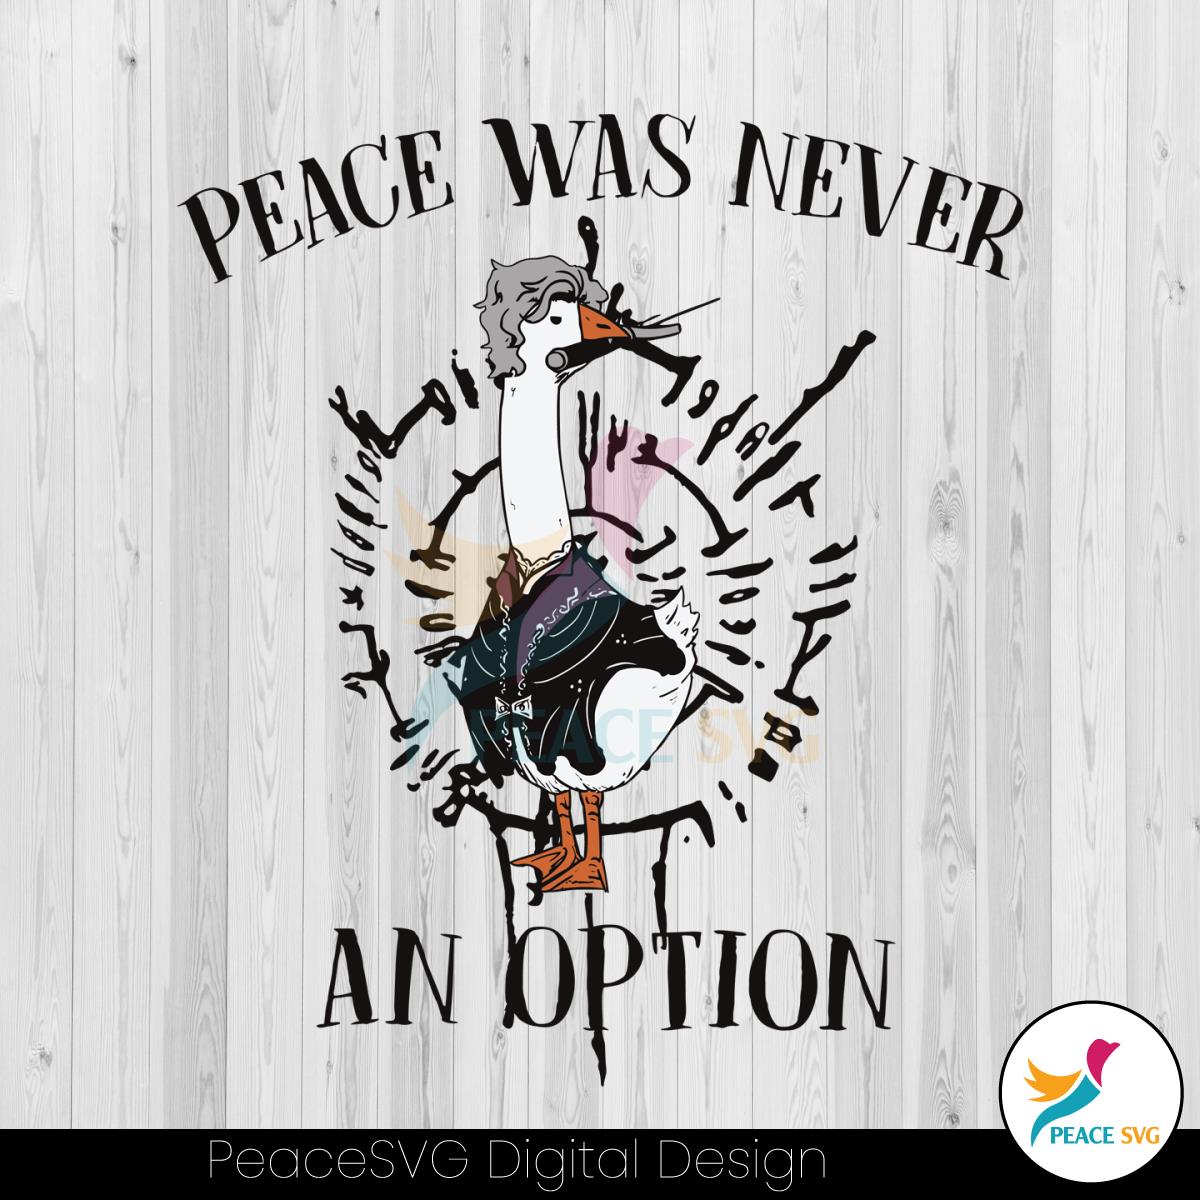 goose-peace-was-never-an-option-svg-graphic-design-file